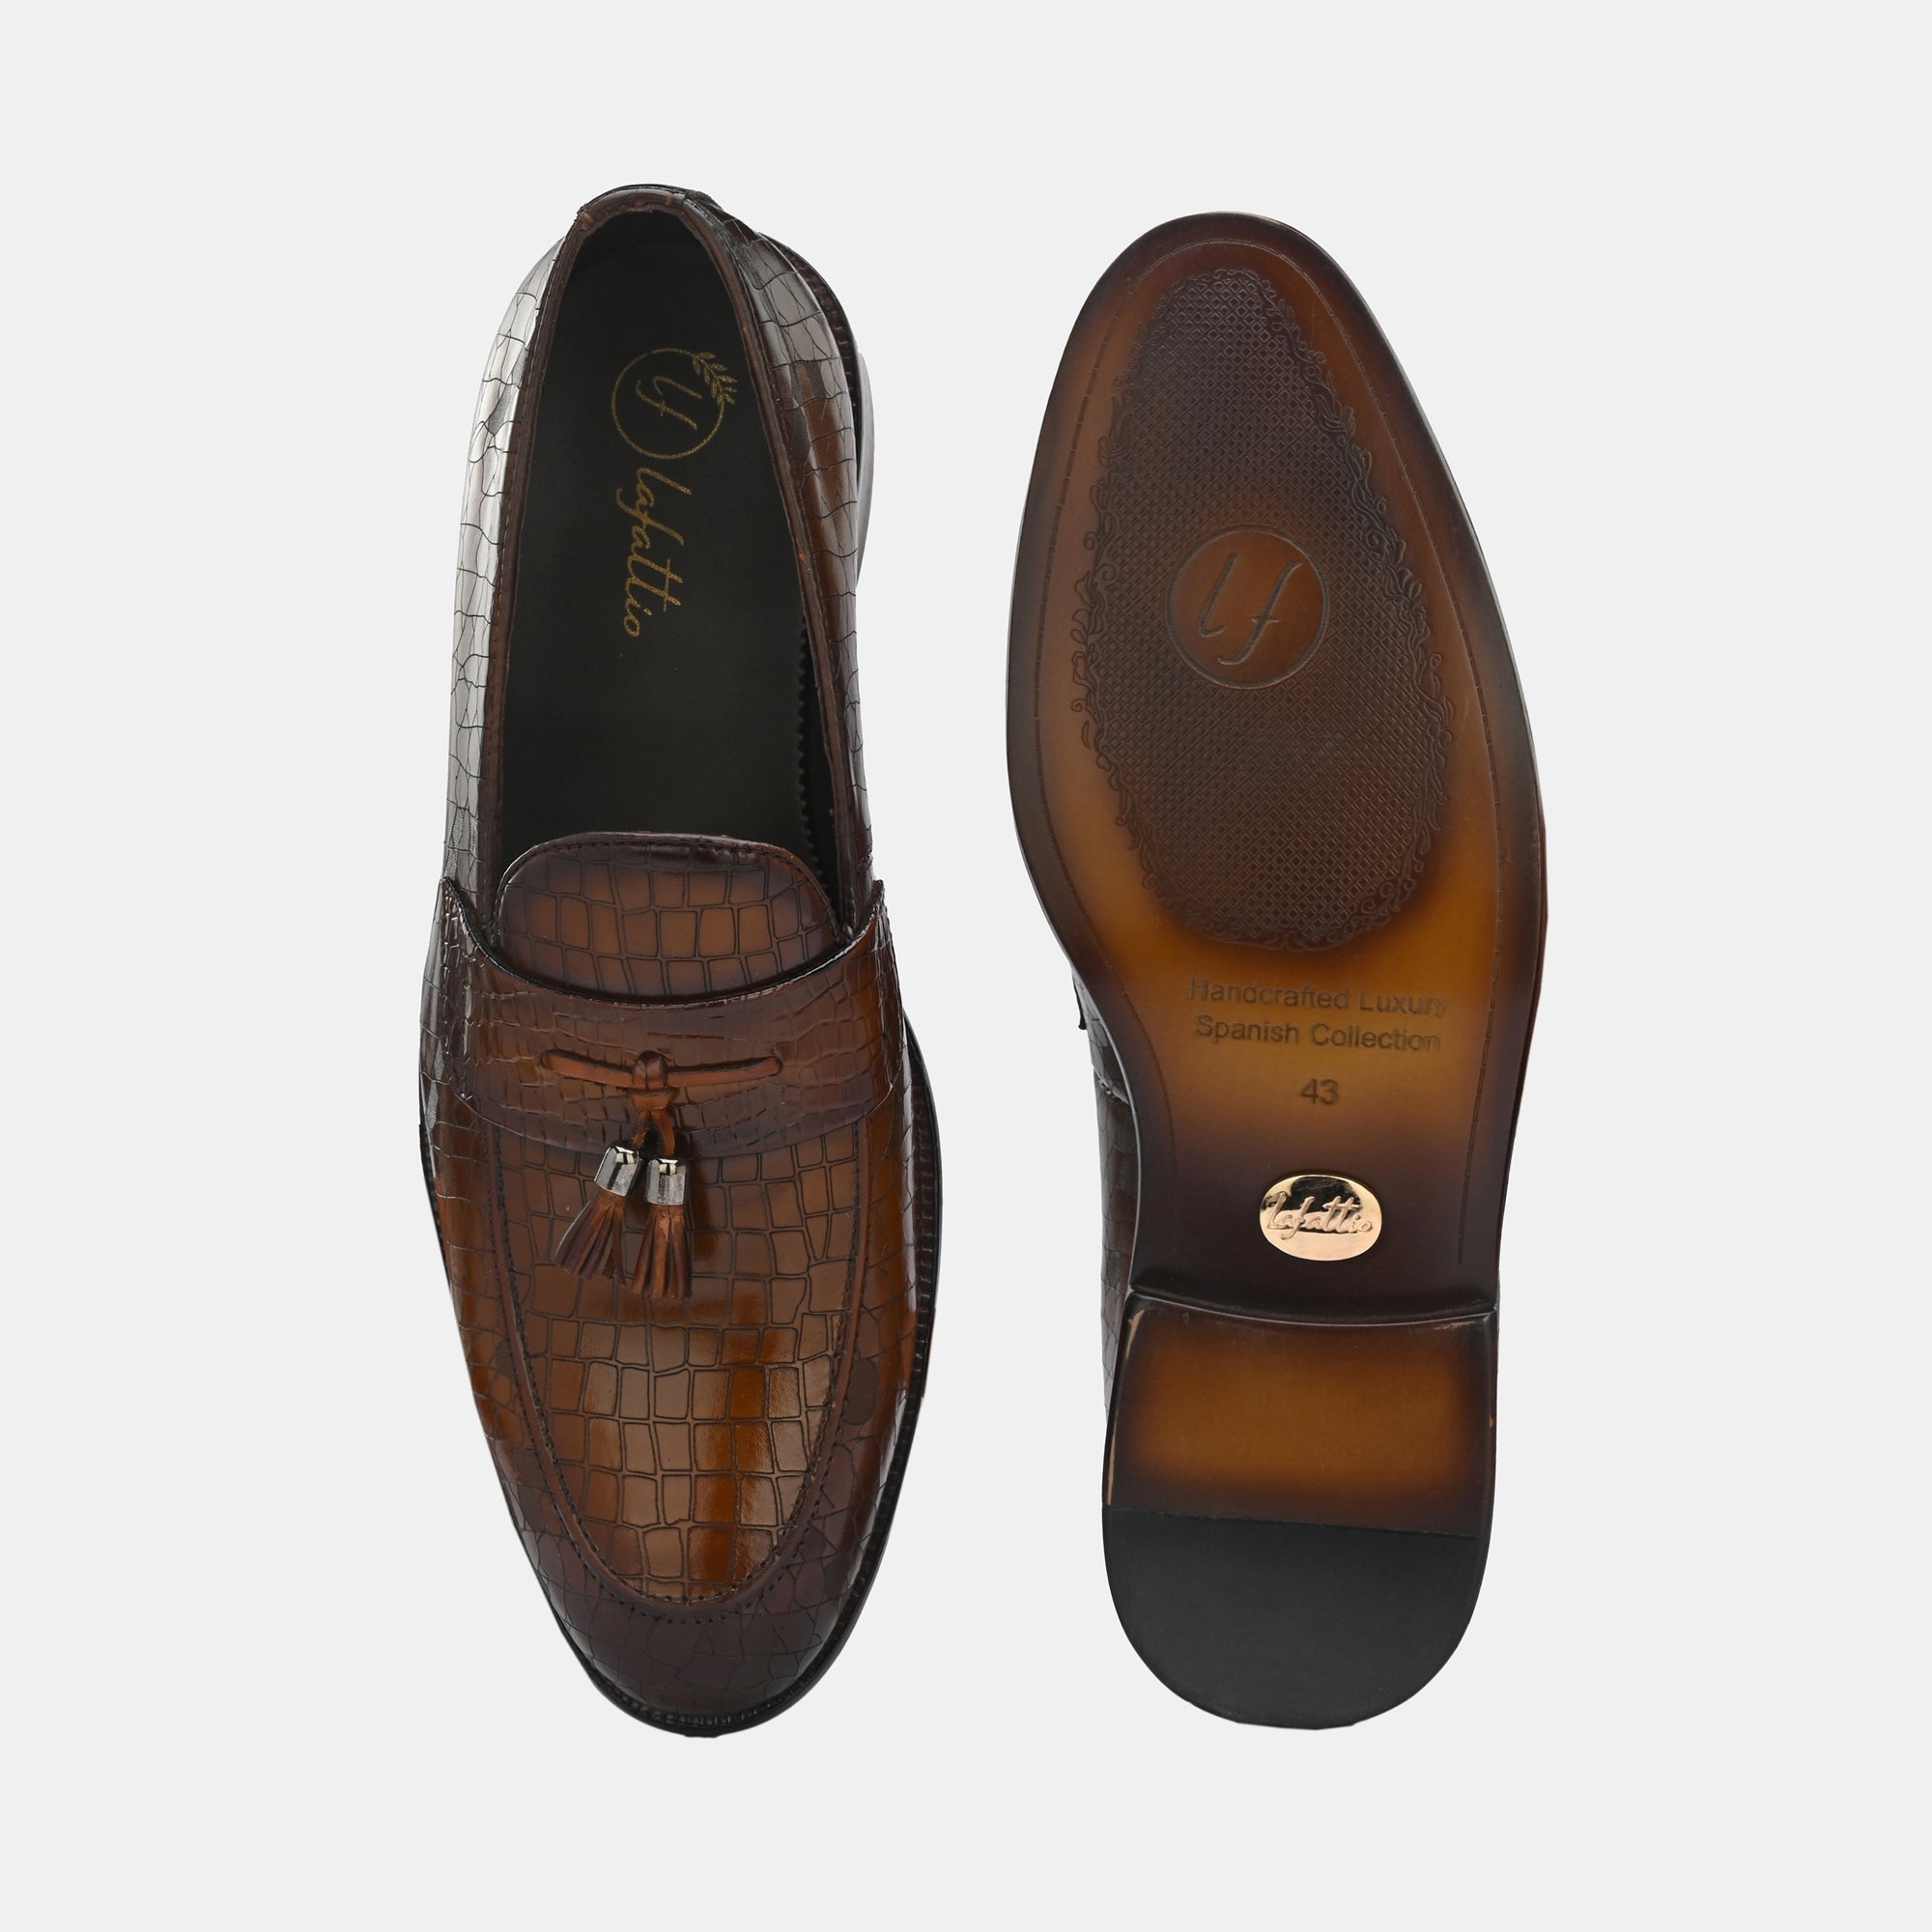 Tan Laser Engraved Tassel Loafers by Lafattio